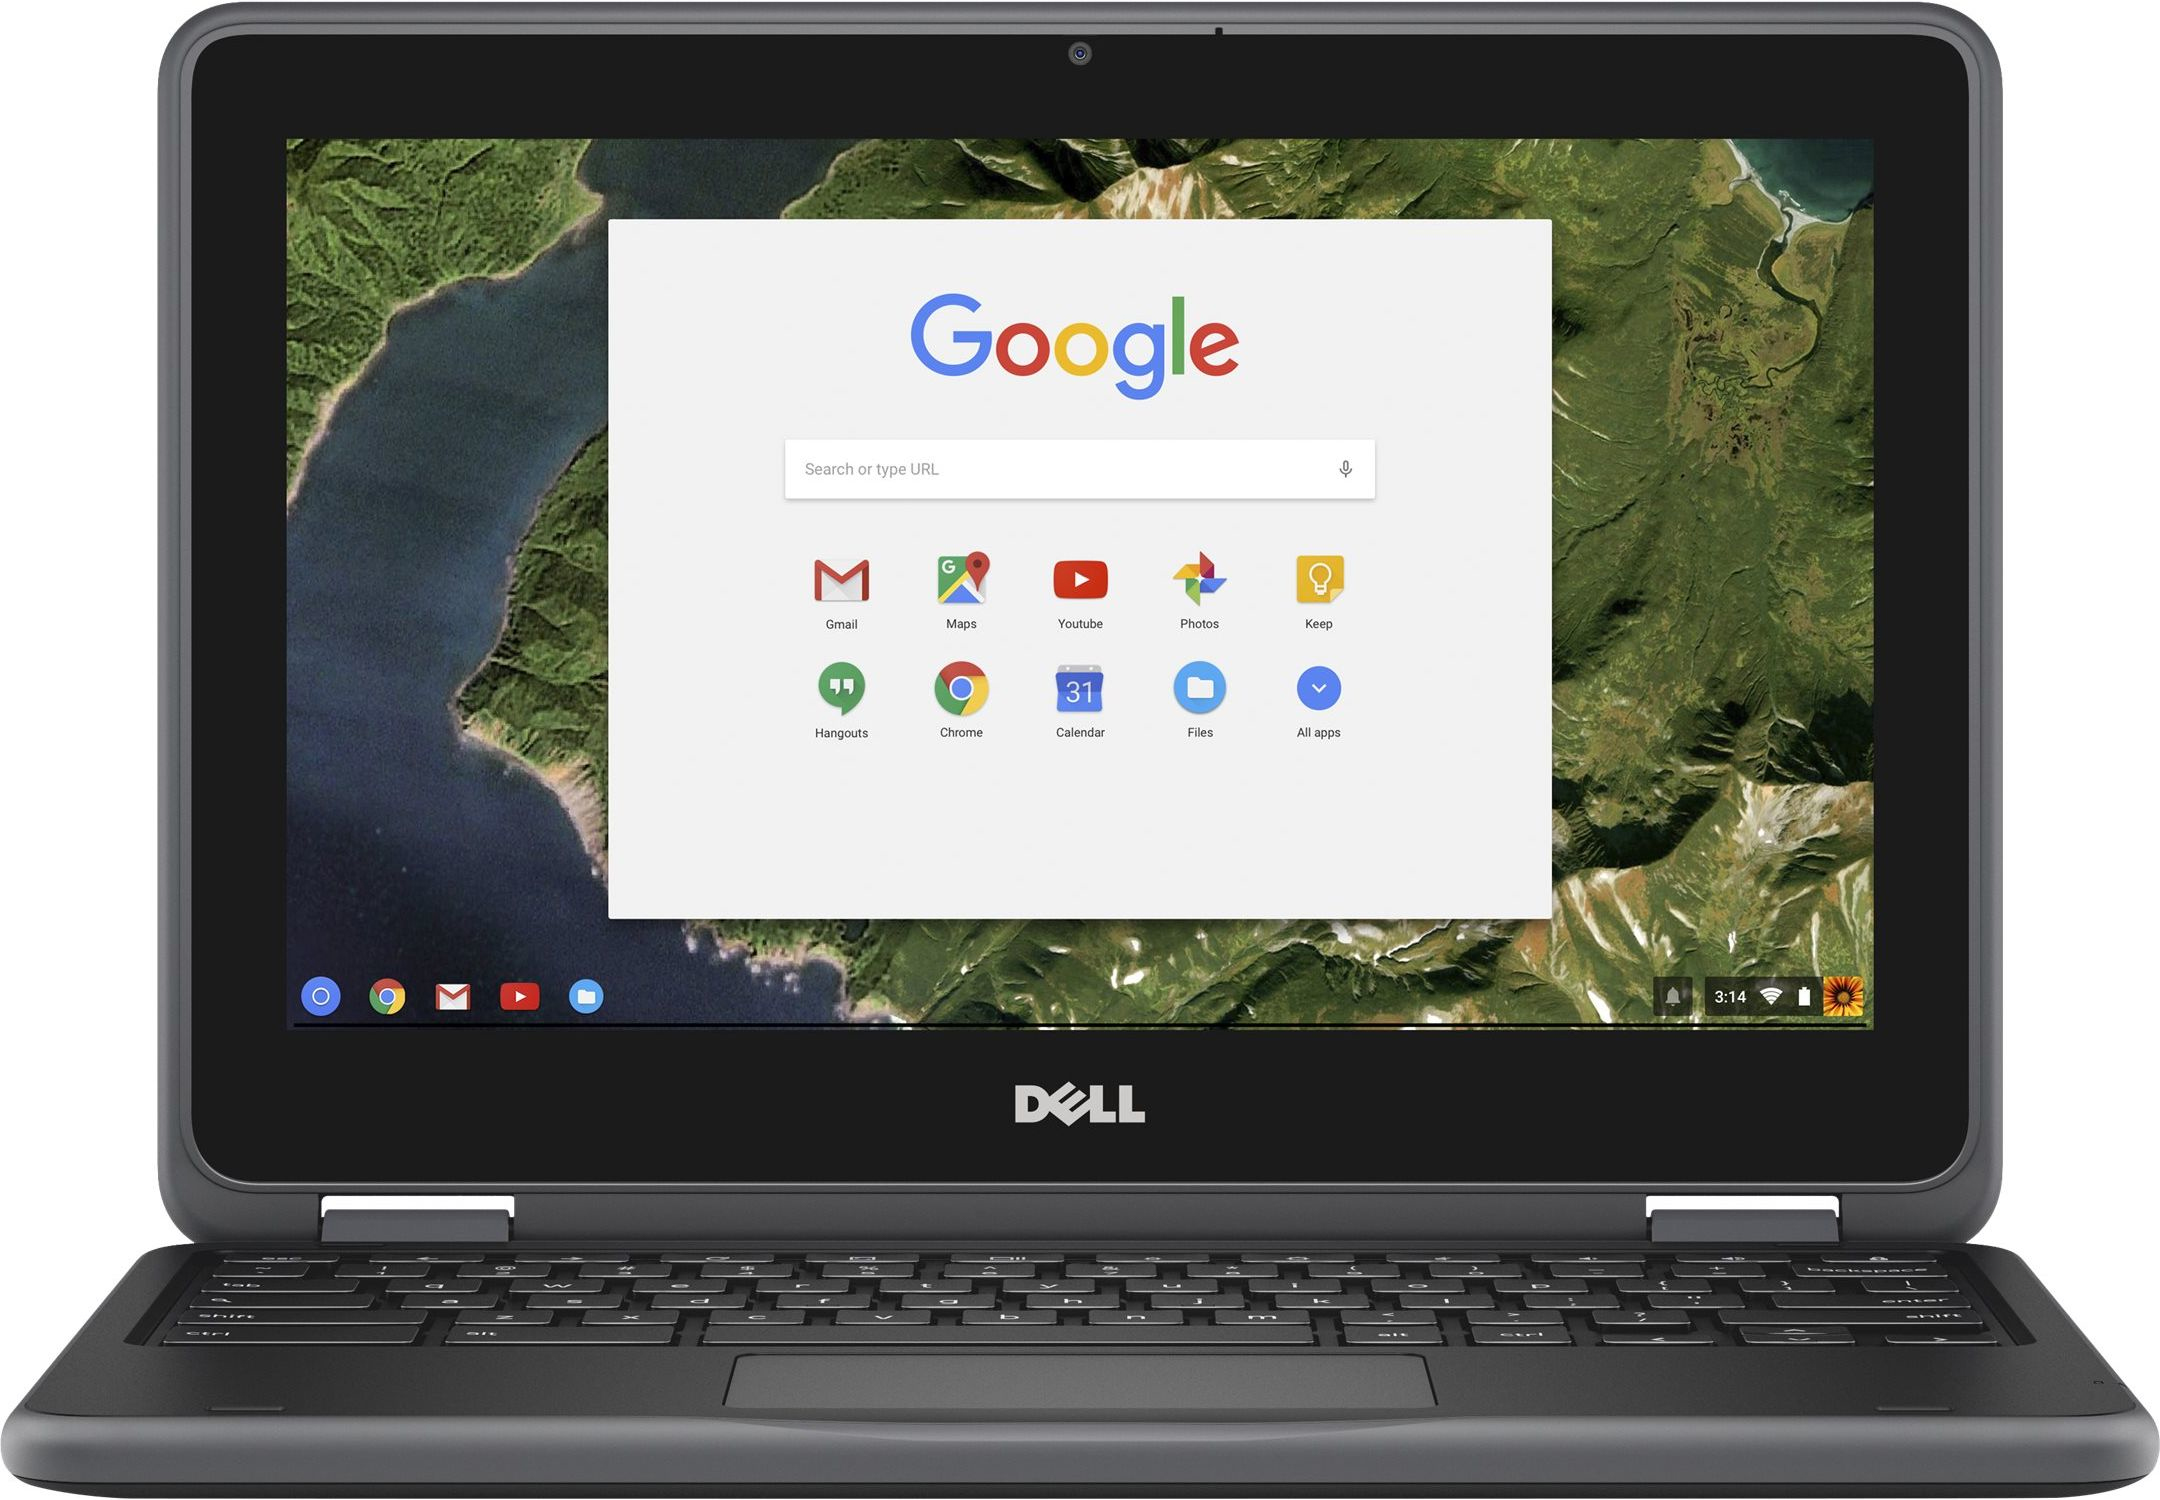 Dell Chromebook 11 3180 - Specs, Tests, and Prices | LaptopMedia.com